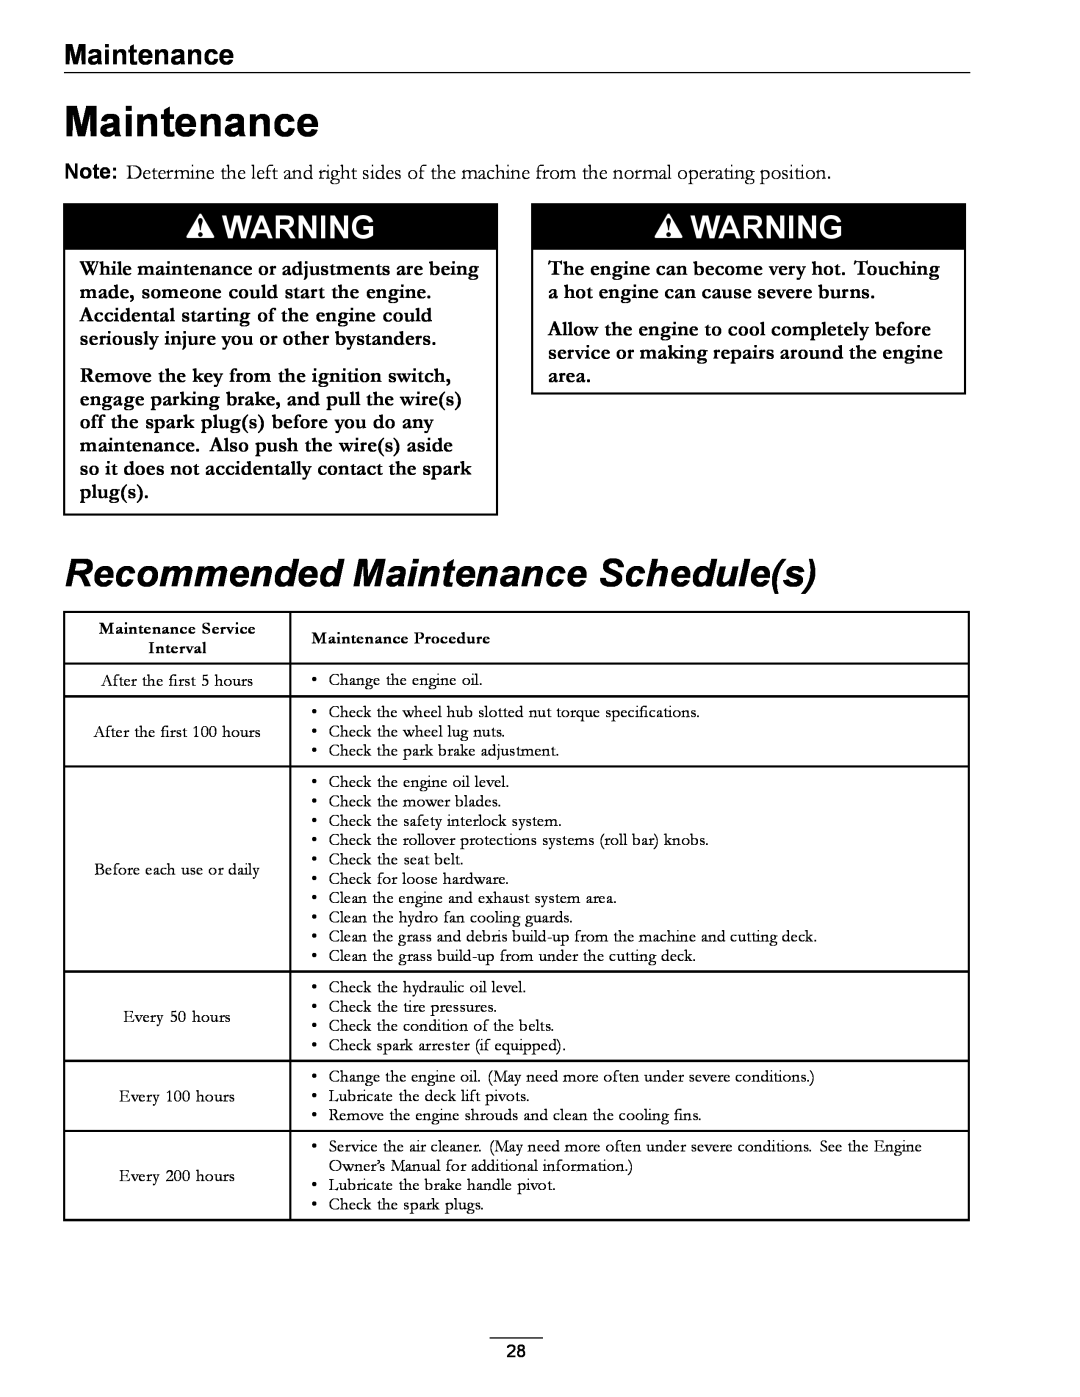 Exmark 4500-471, 000 & higher, S/N 790 manual Recommended Maintenance Schedules 